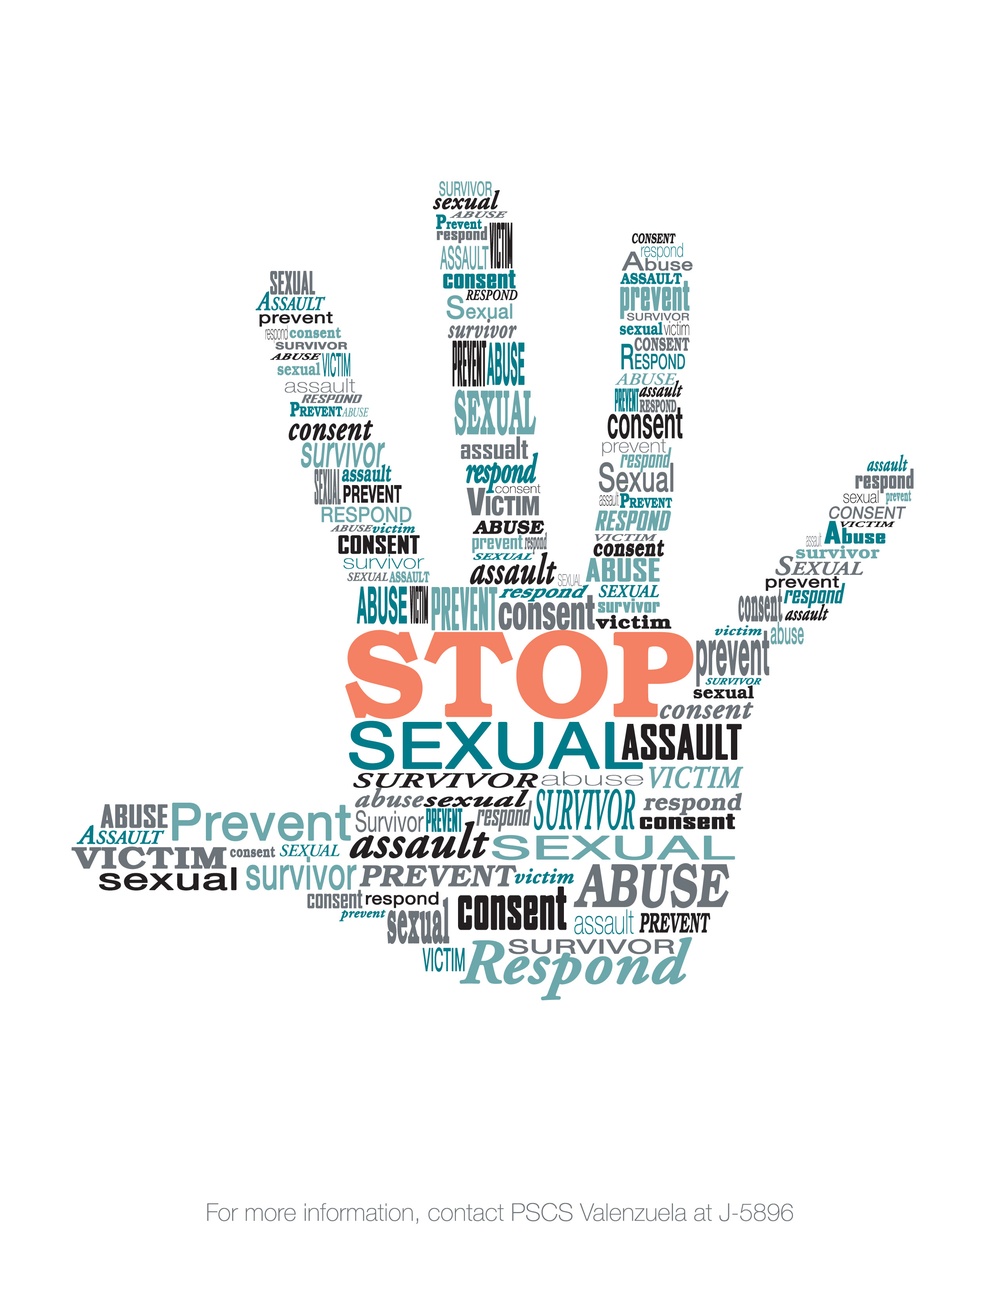 stop sexual abuse